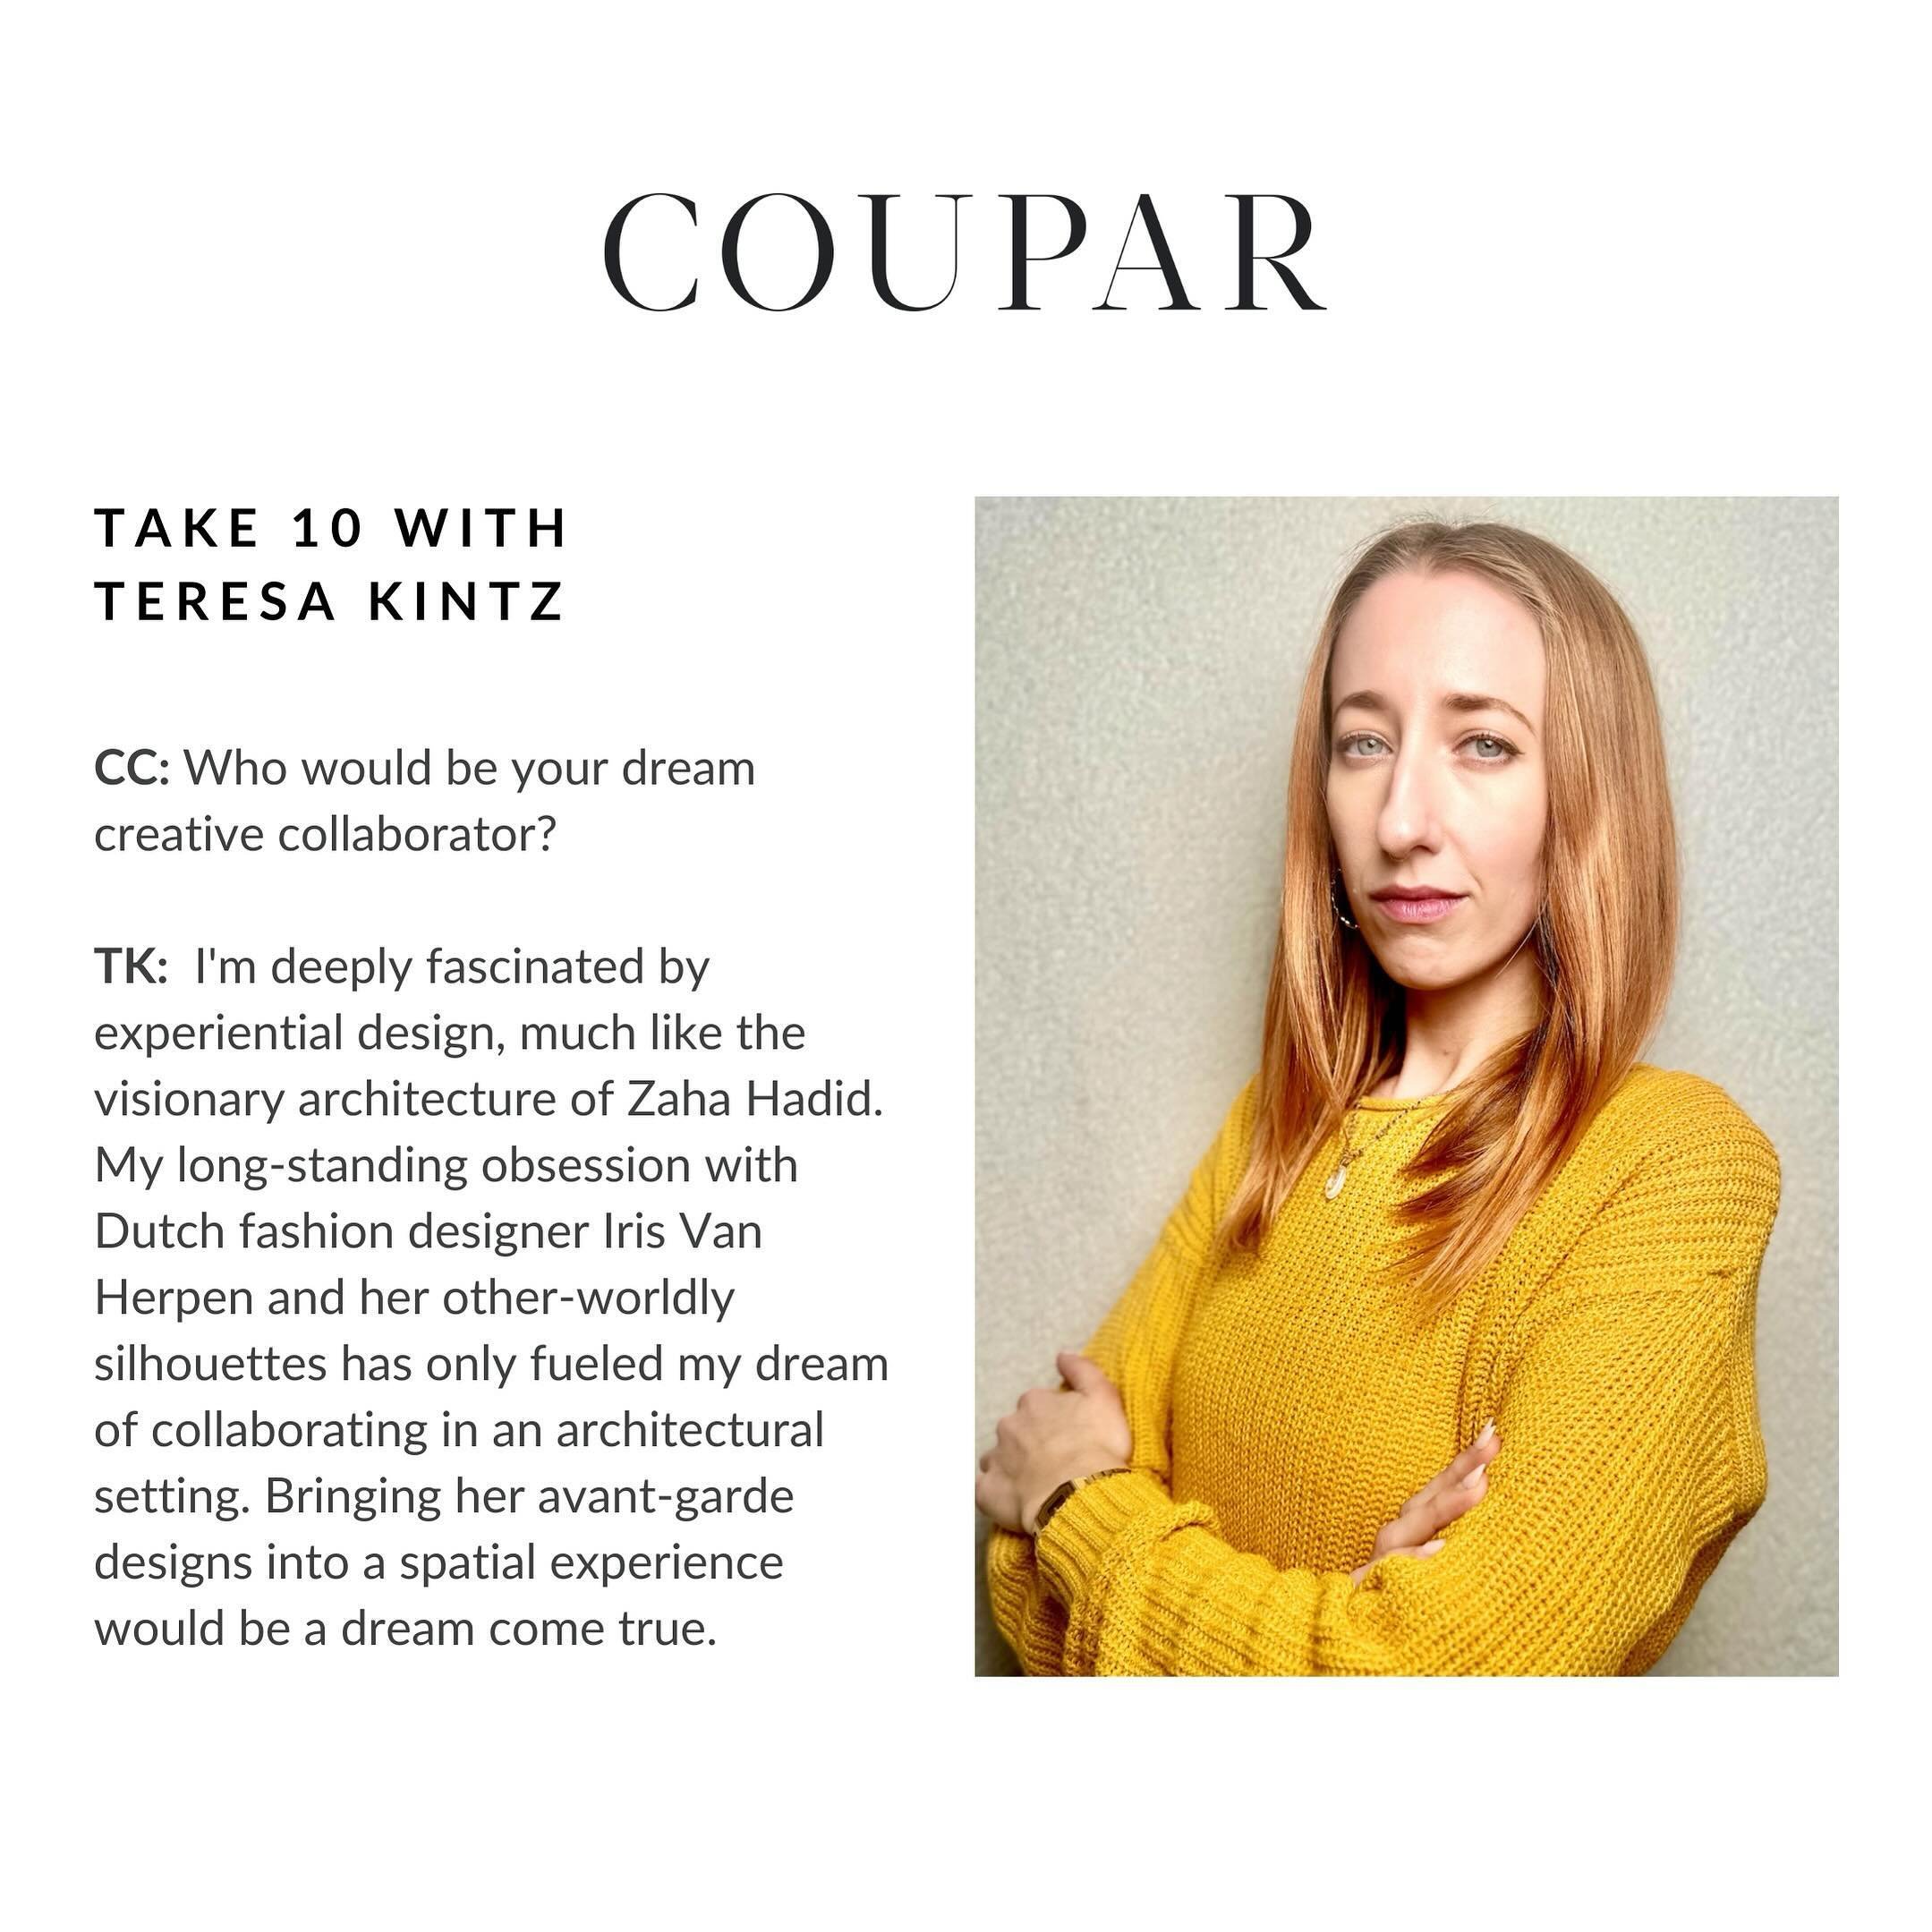 As a Principal at COUPAR, Teresa Kintz sets the aesthetic and operational tone for the company, bridging interior design and tech. Teresa oversees both COUPAR Studio and COUPAR Design and has implemented a high level of organization while keeping a h